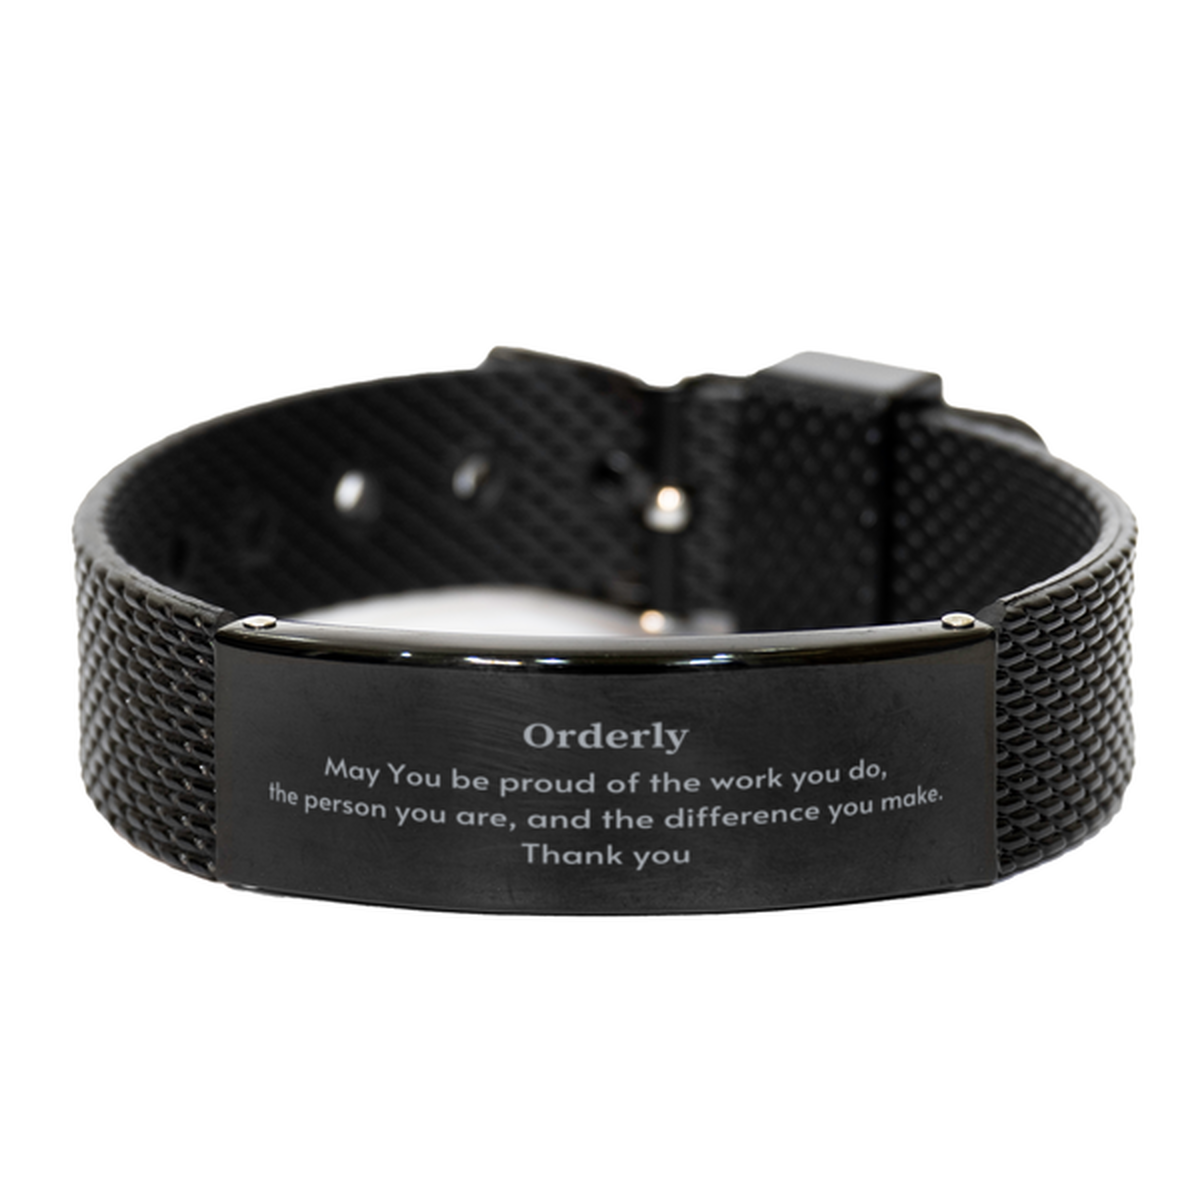 Heartwarming Black Shark Mesh Bracelet Retirement Coworkers Gifts for Orderly, Orderly May You be proud of the work you do, the person you are Gifts for Boss Men Women Friends